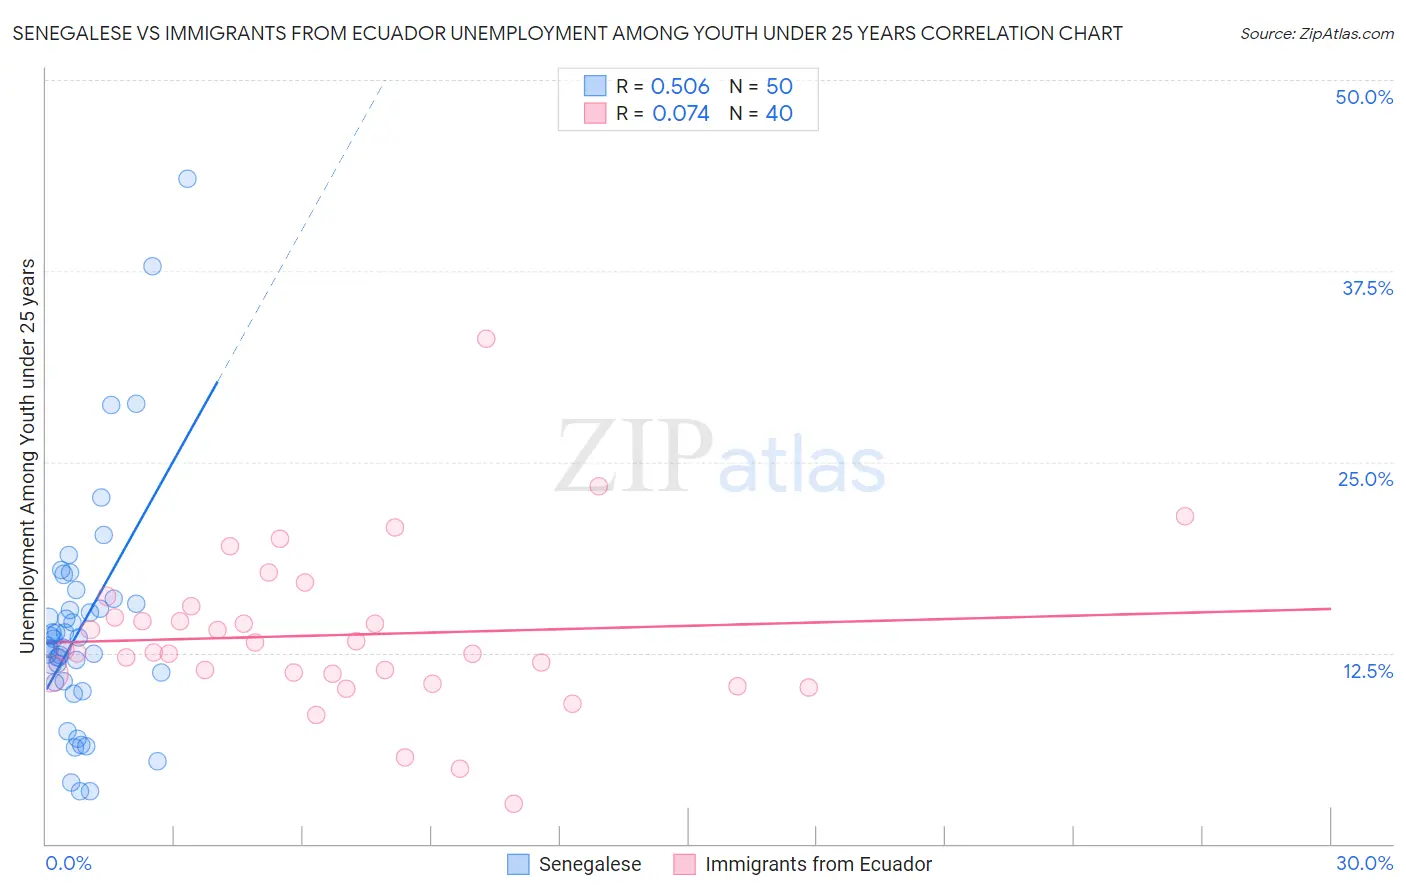 Senegalese vs Immigrants from Ecuador Unemployment Among Youth under 25 years